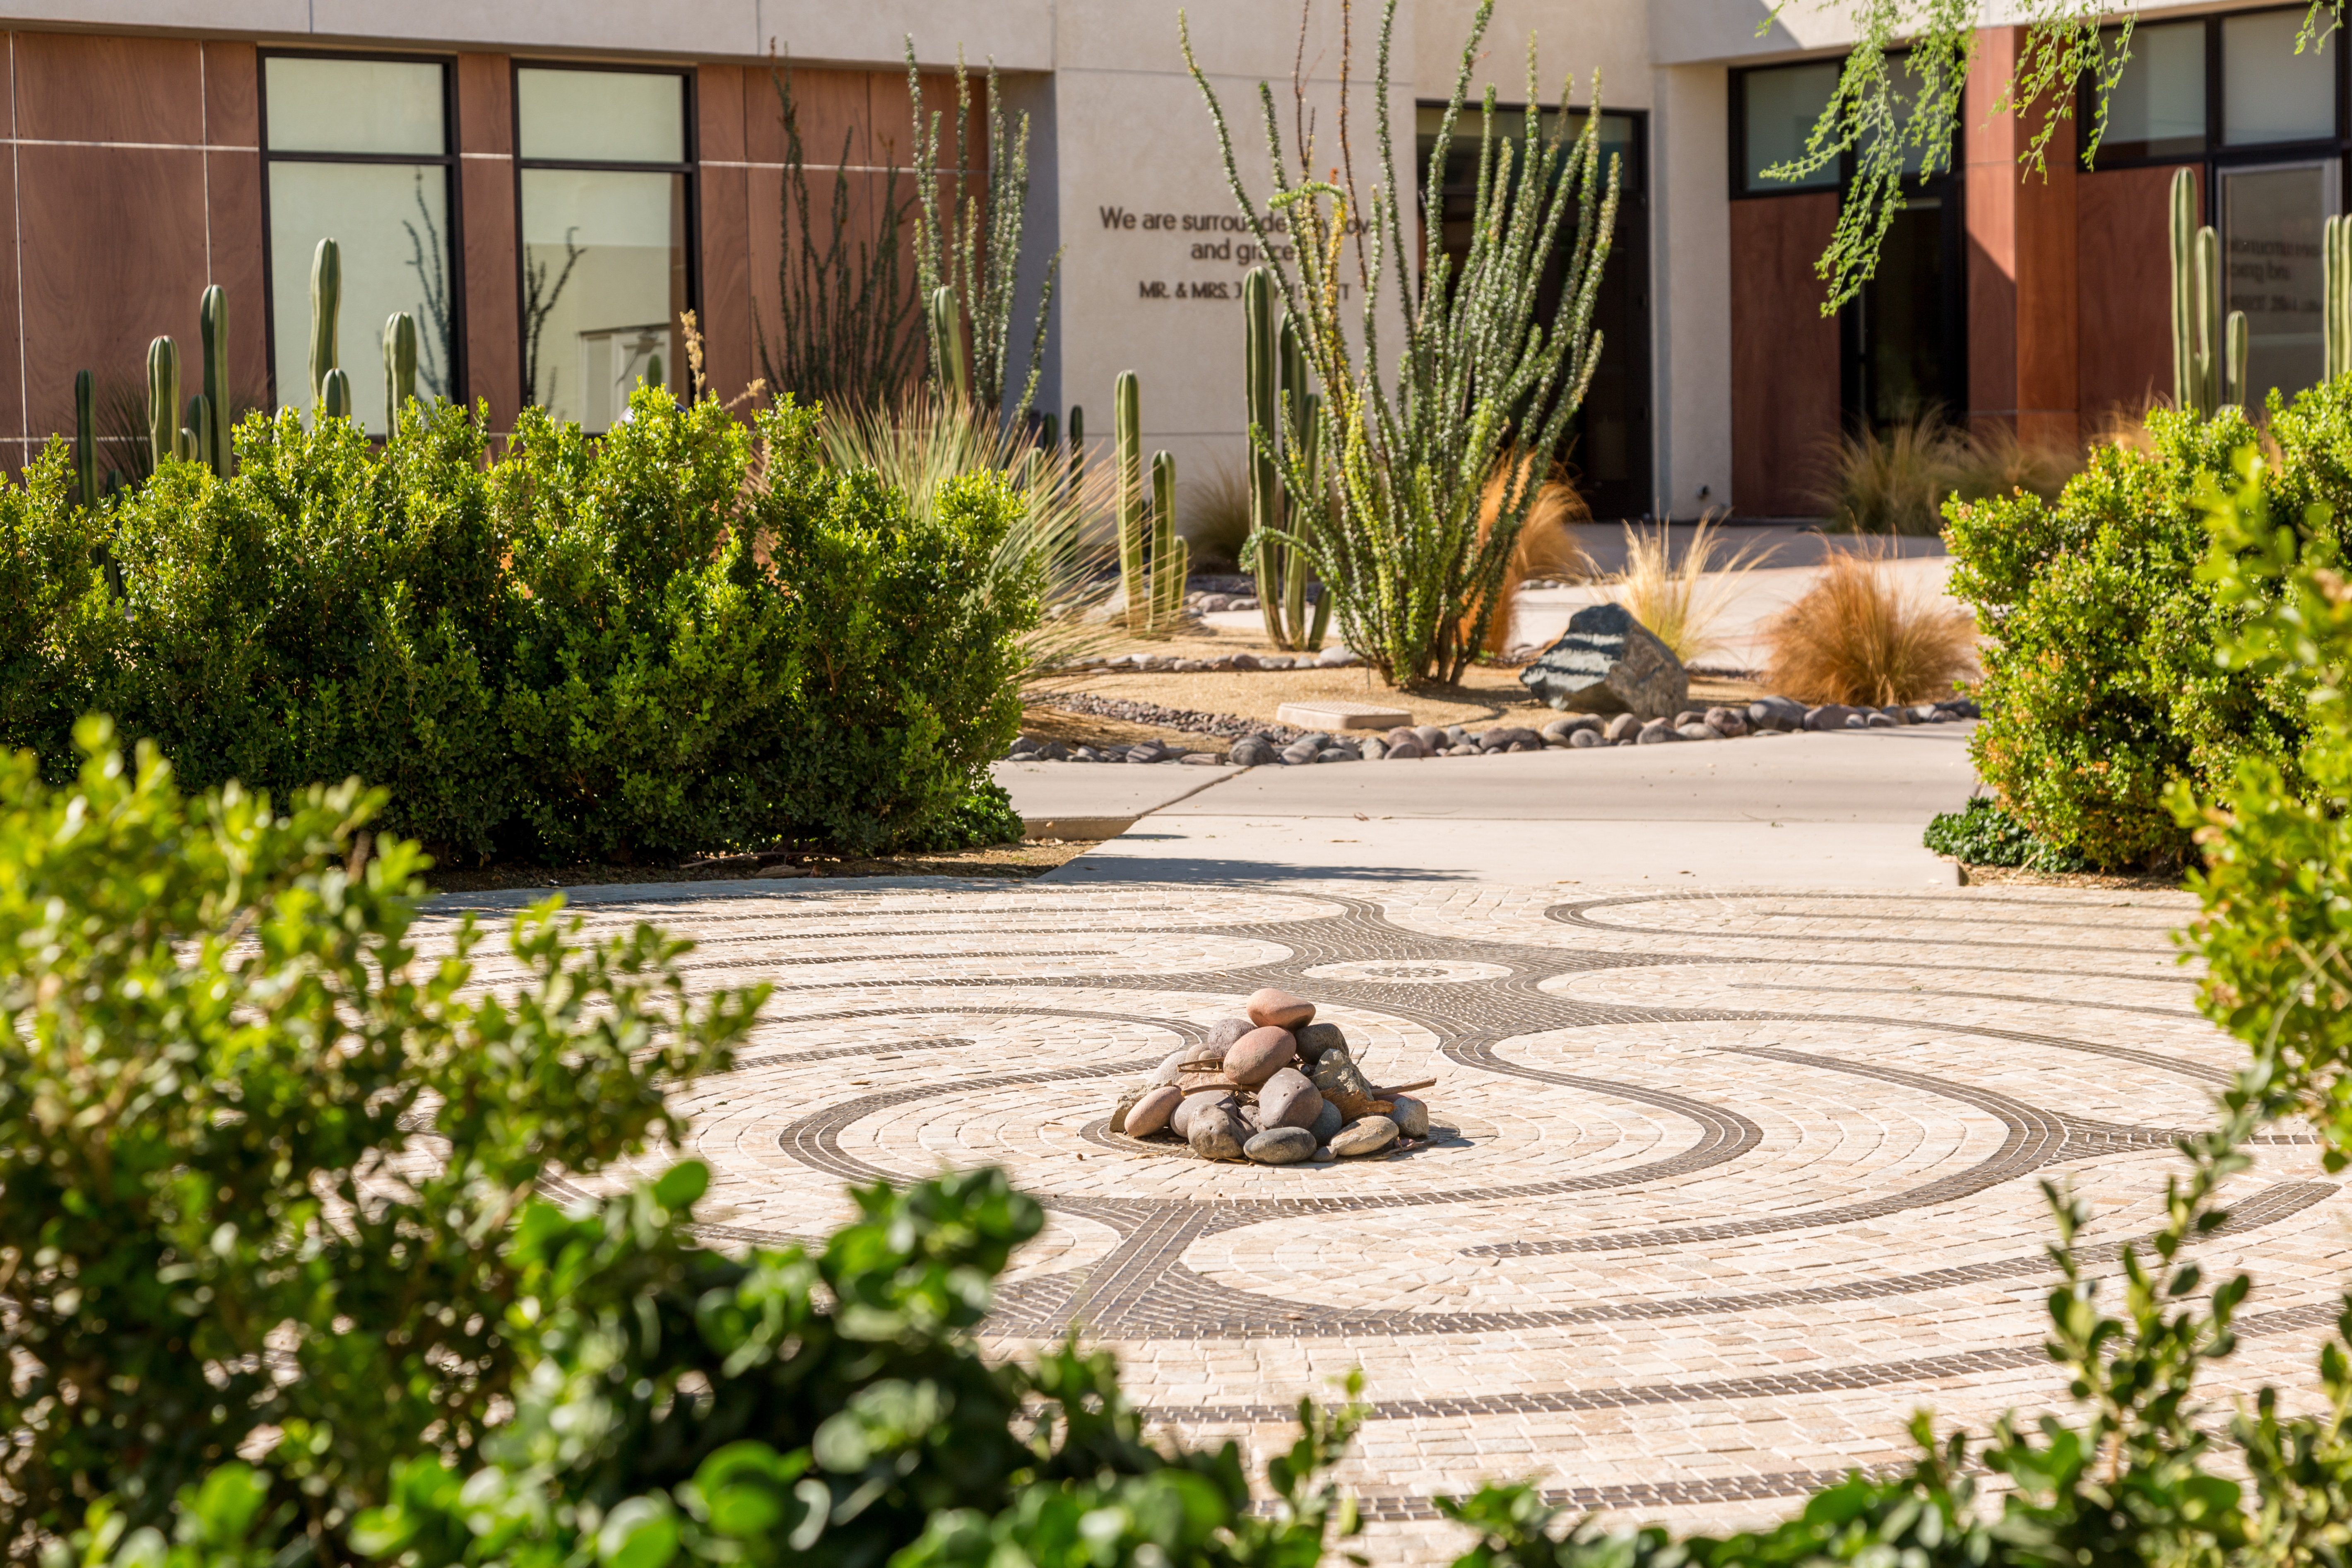 A view of the stone garden in the Betty Ford Center